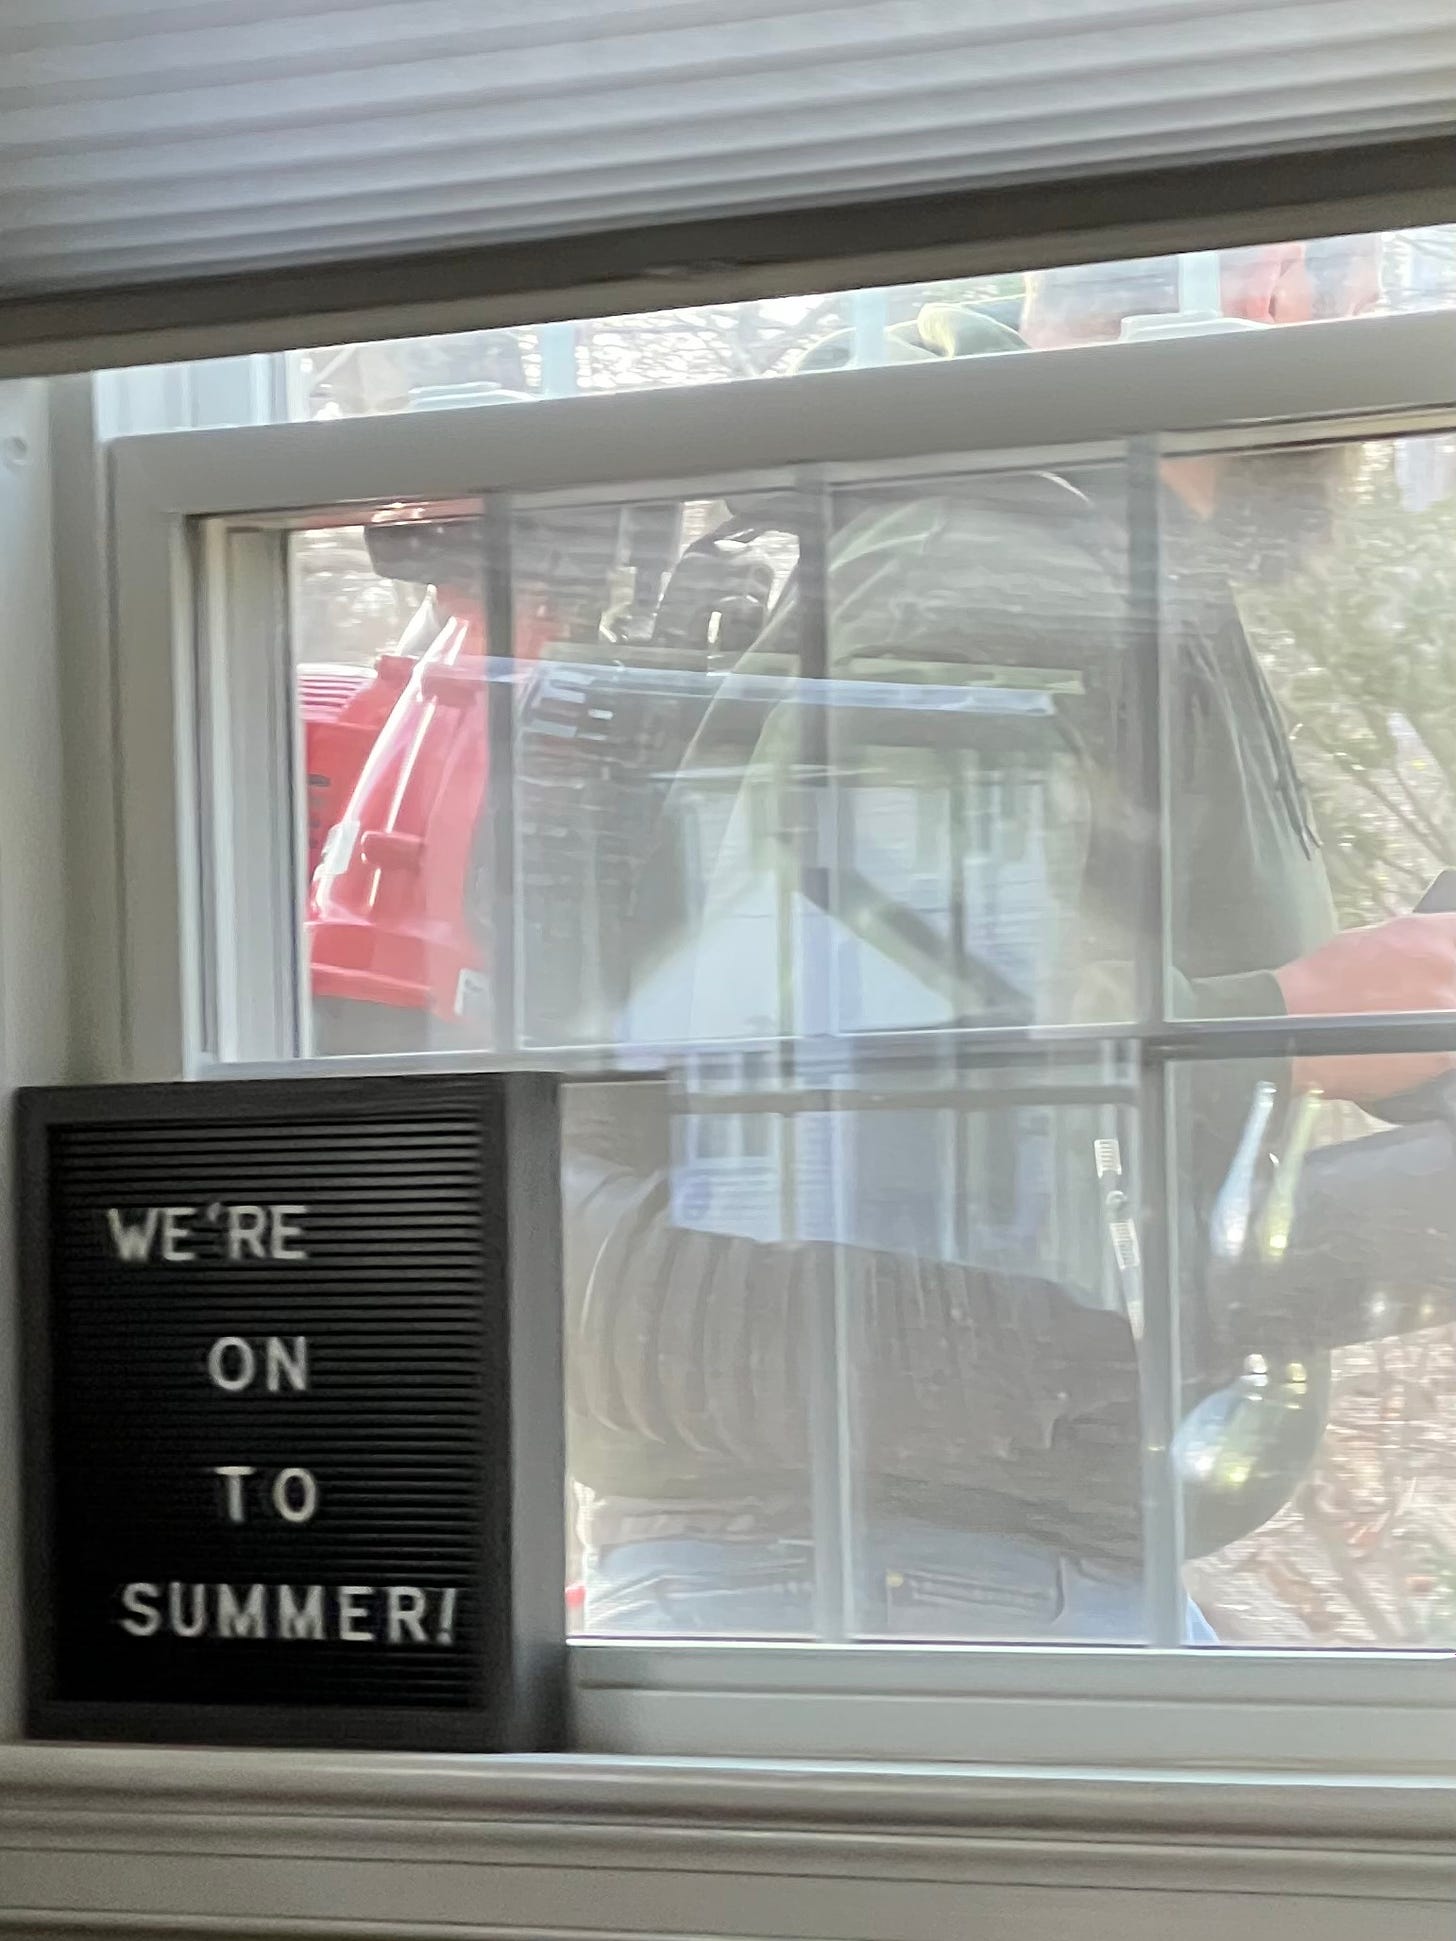 Picture of a man with a leaf blower right outside a window; a sign in the window reads “We’re on to summer”